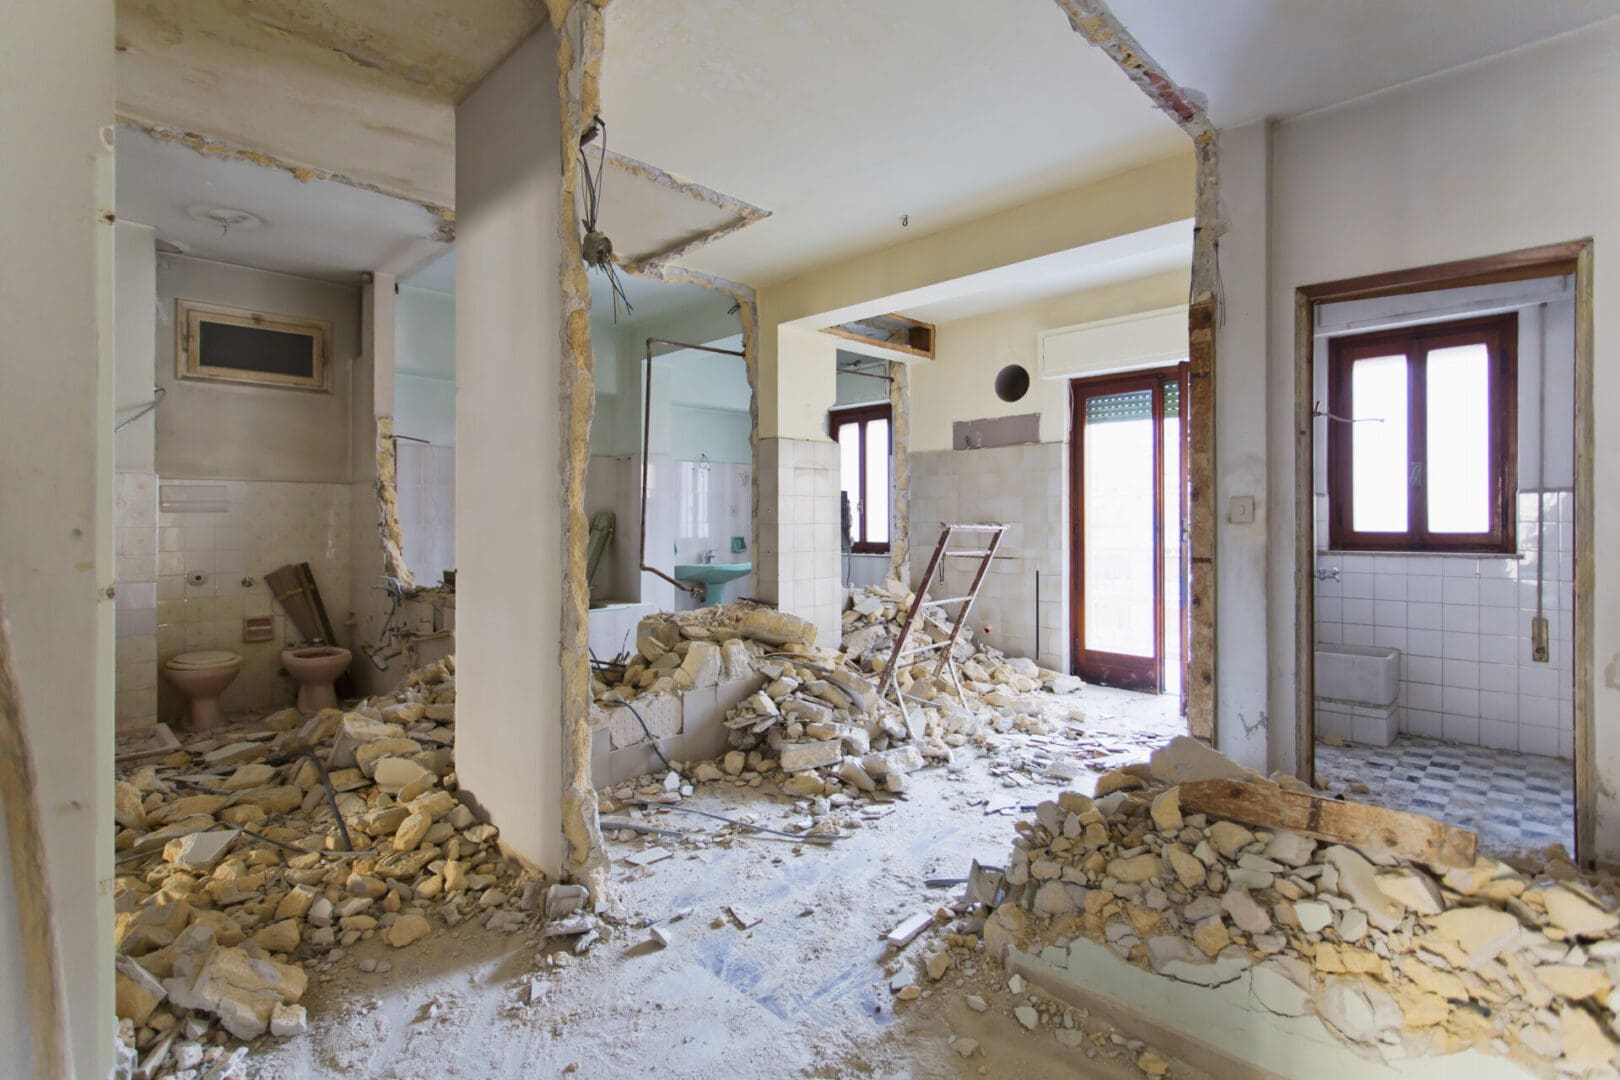 A room that has been demolished and is being remodeled.